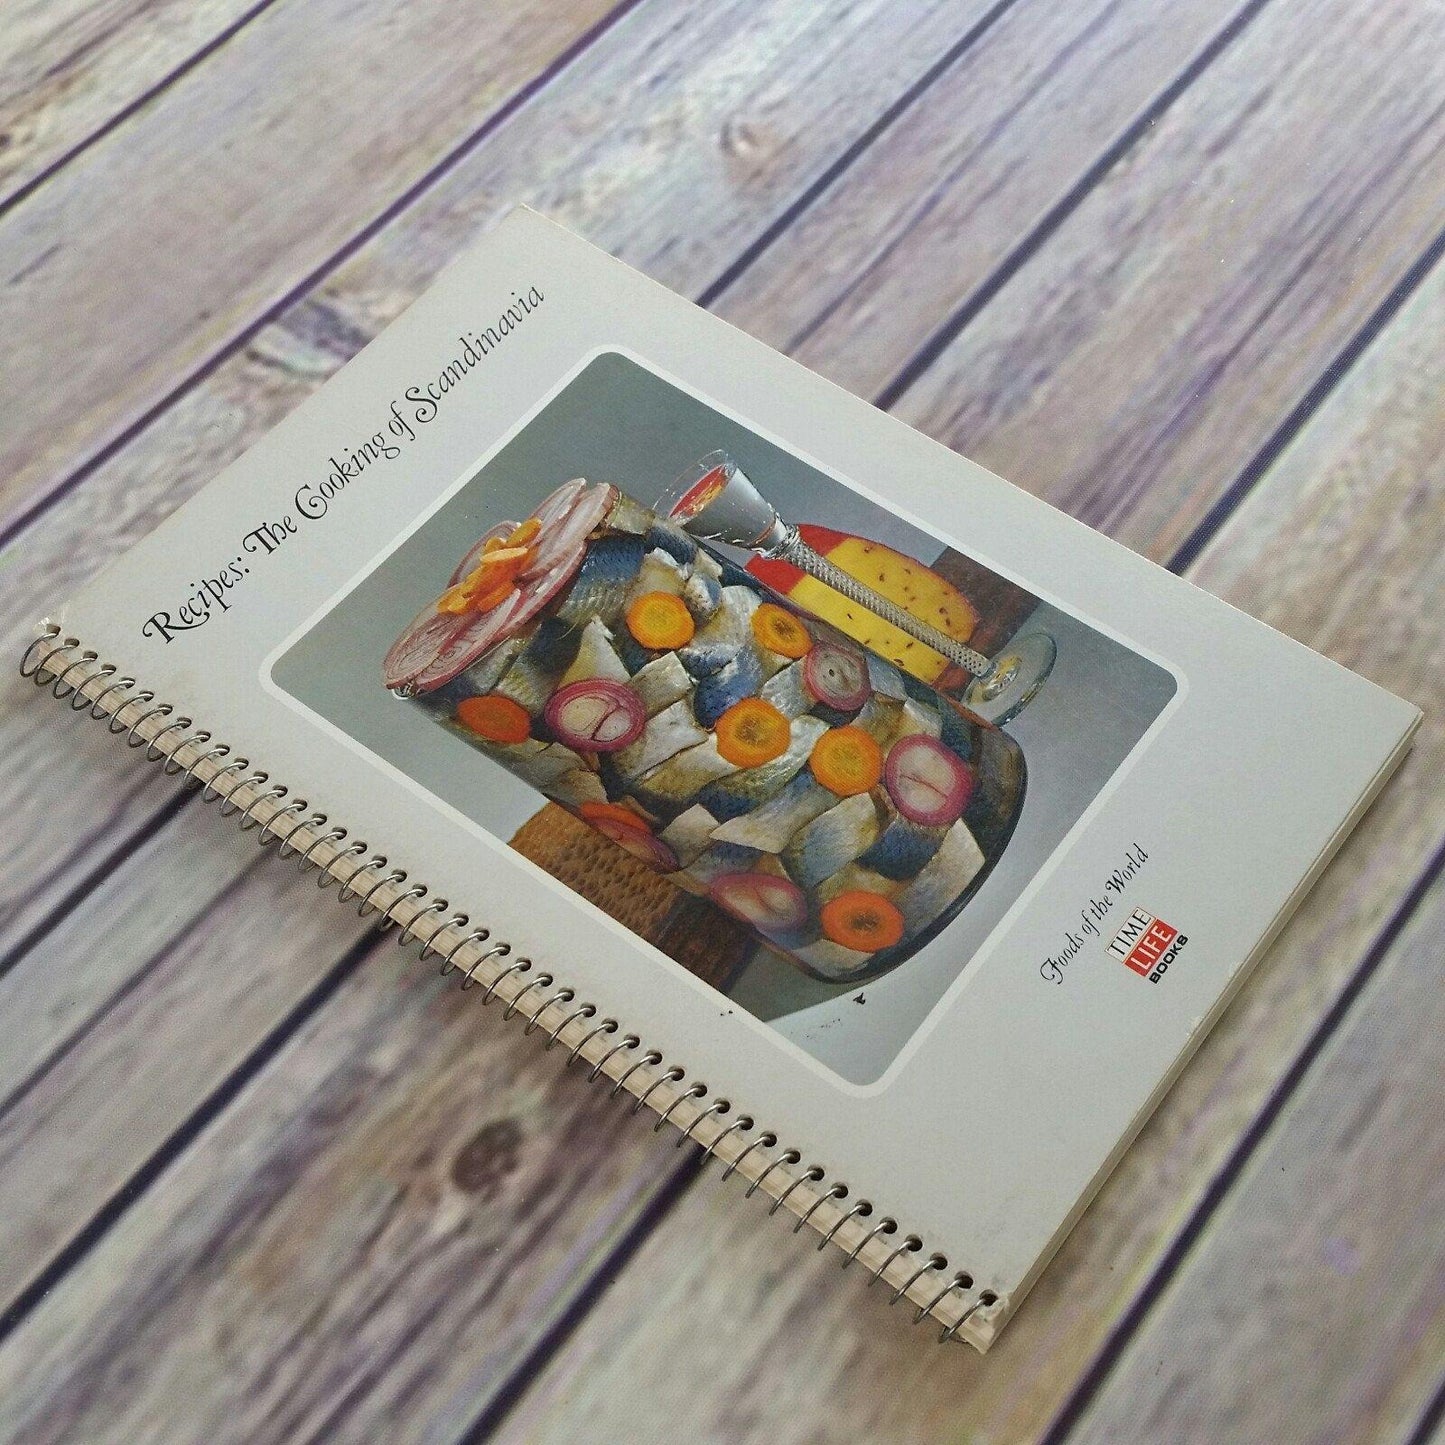 Vintage Cookbook Scandinavian Cooking Recipes Time Life Books Foods of the World 1968 Spiral Bound The Cooking of Scandinavia